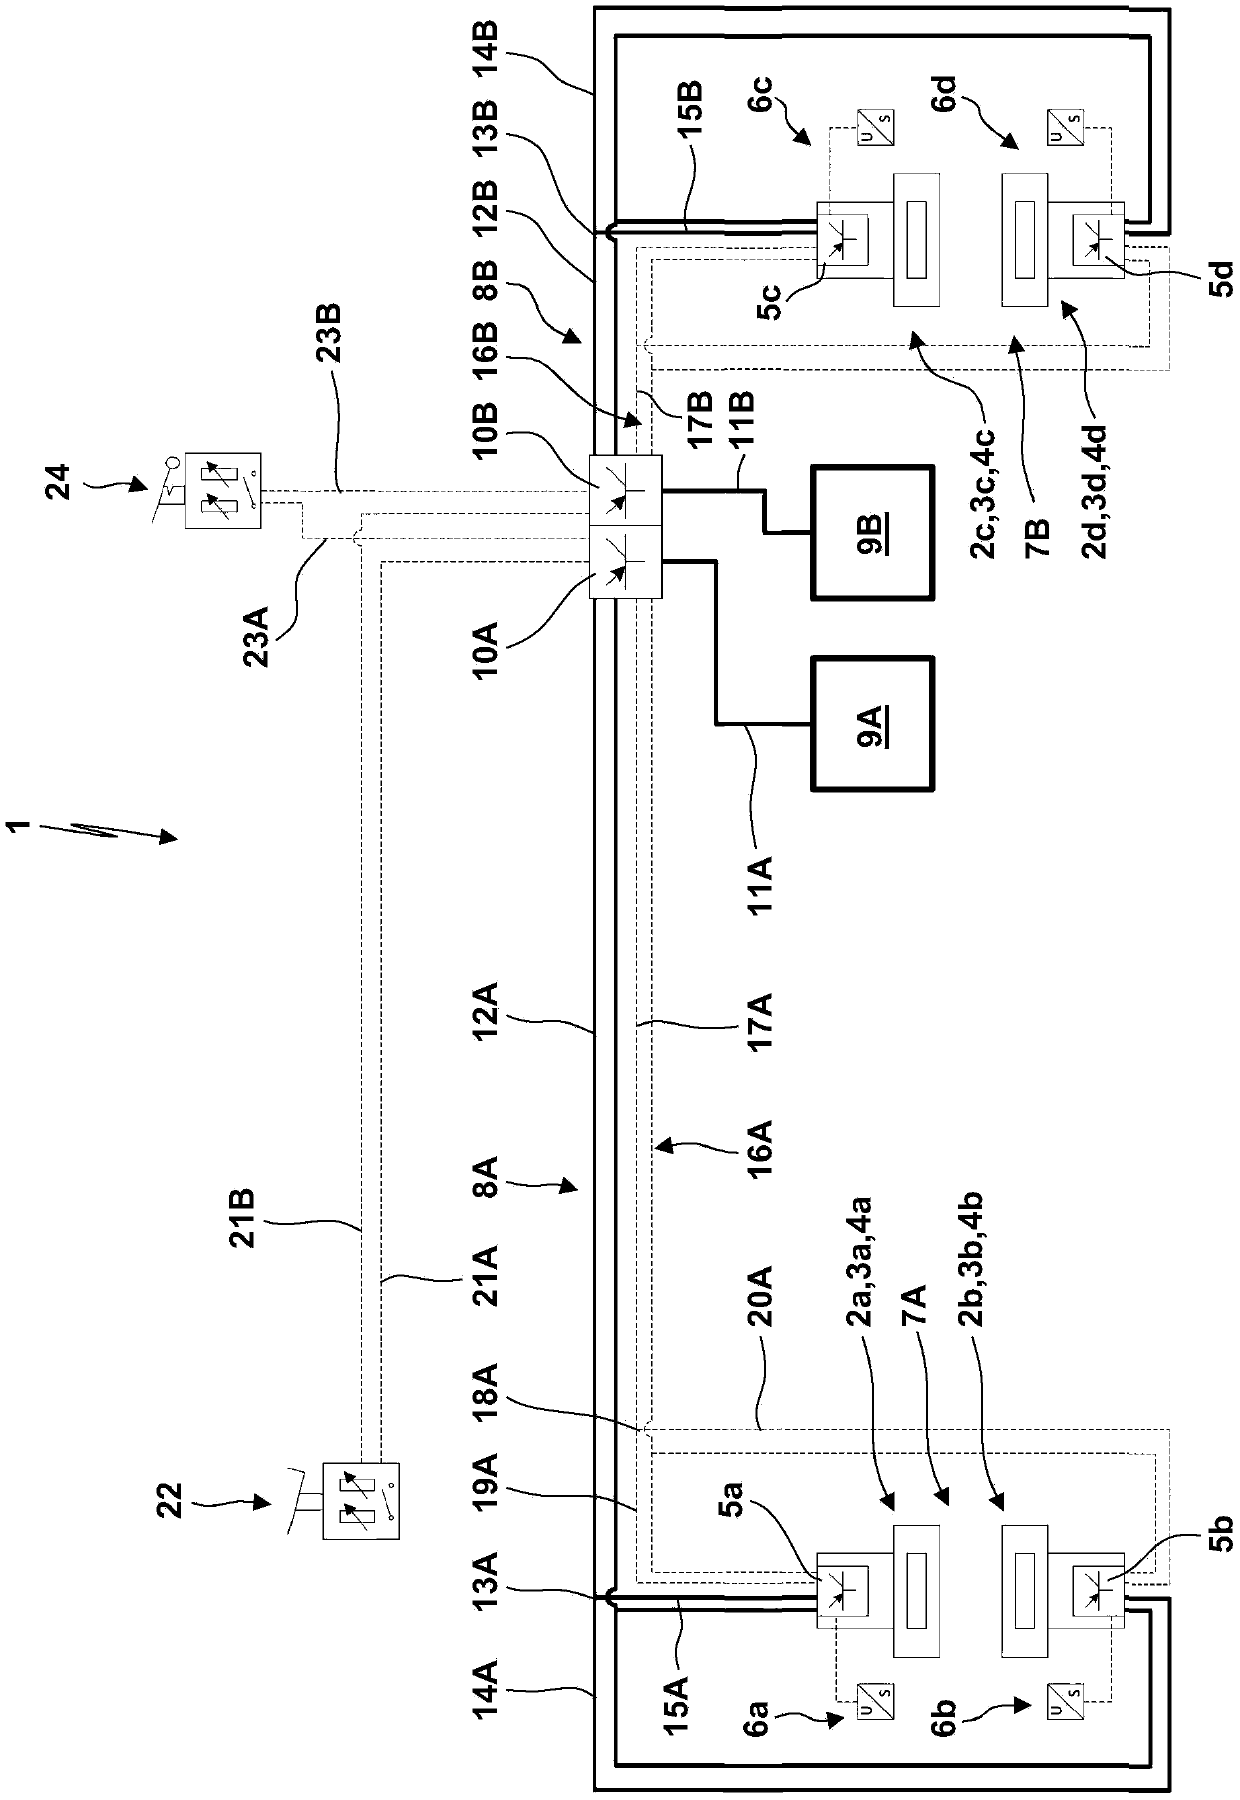 Electric brake system for a vehicle